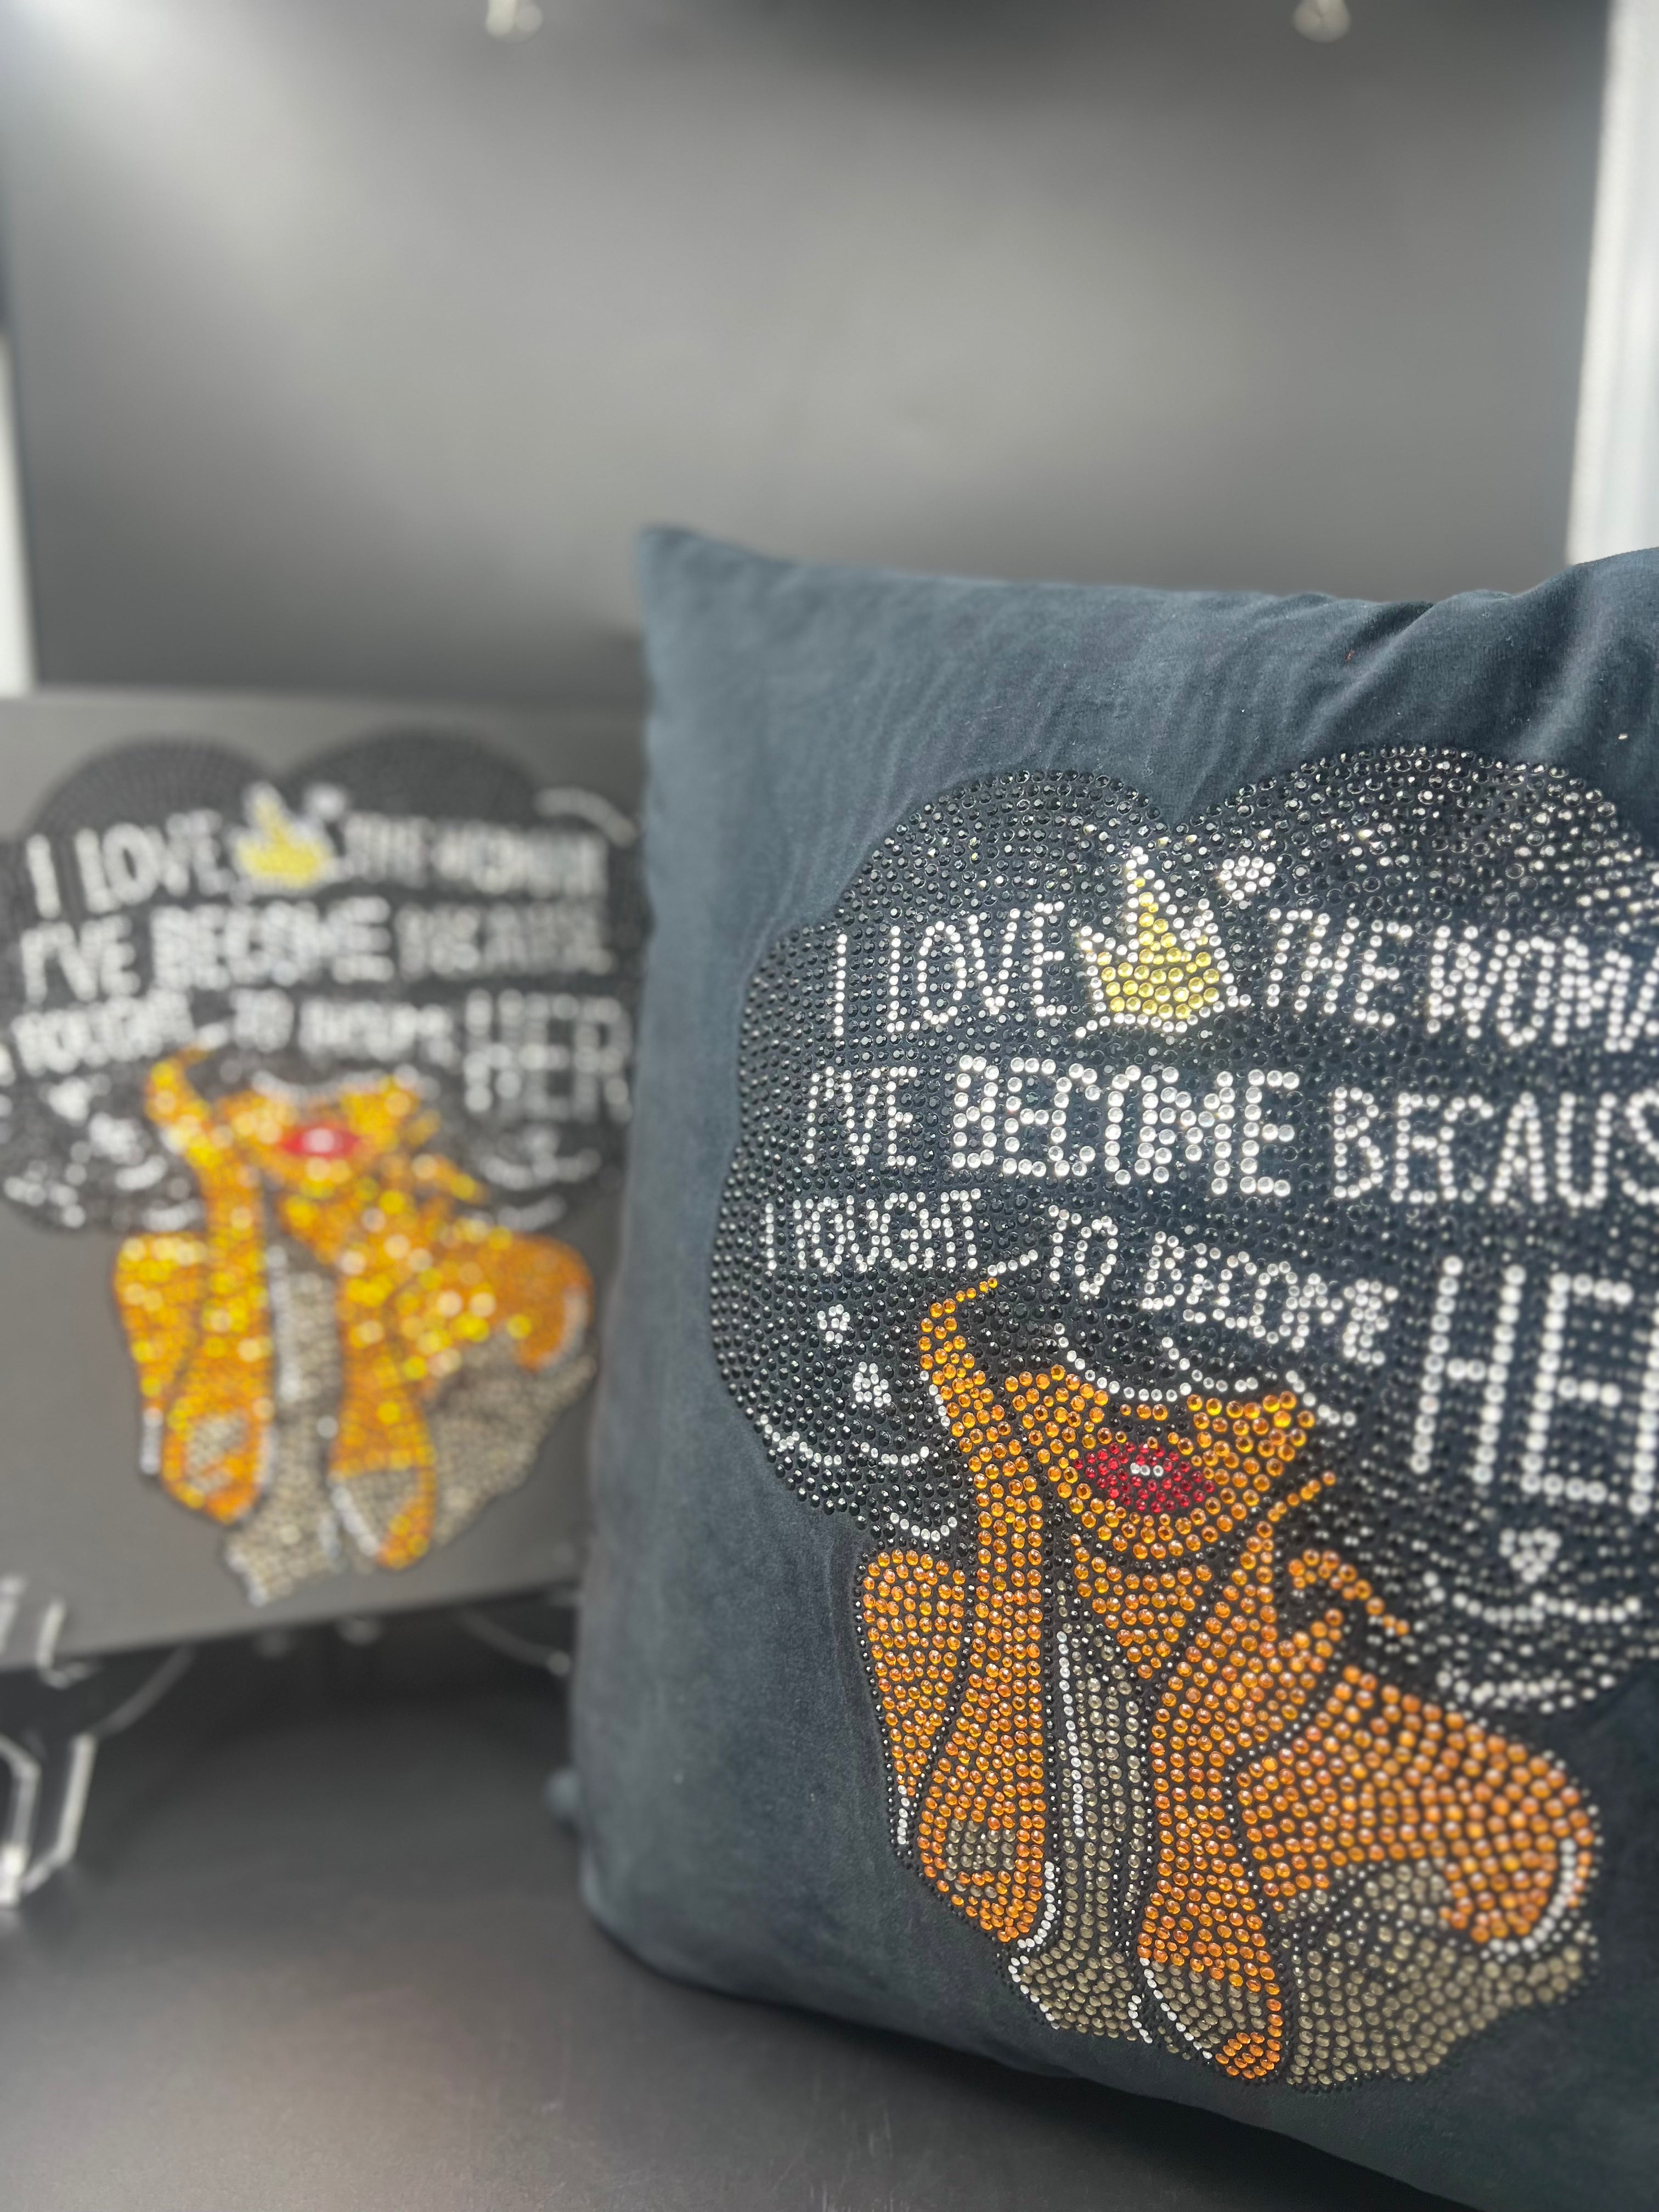 I Fought to Become Her  Canvas & Pillow Set